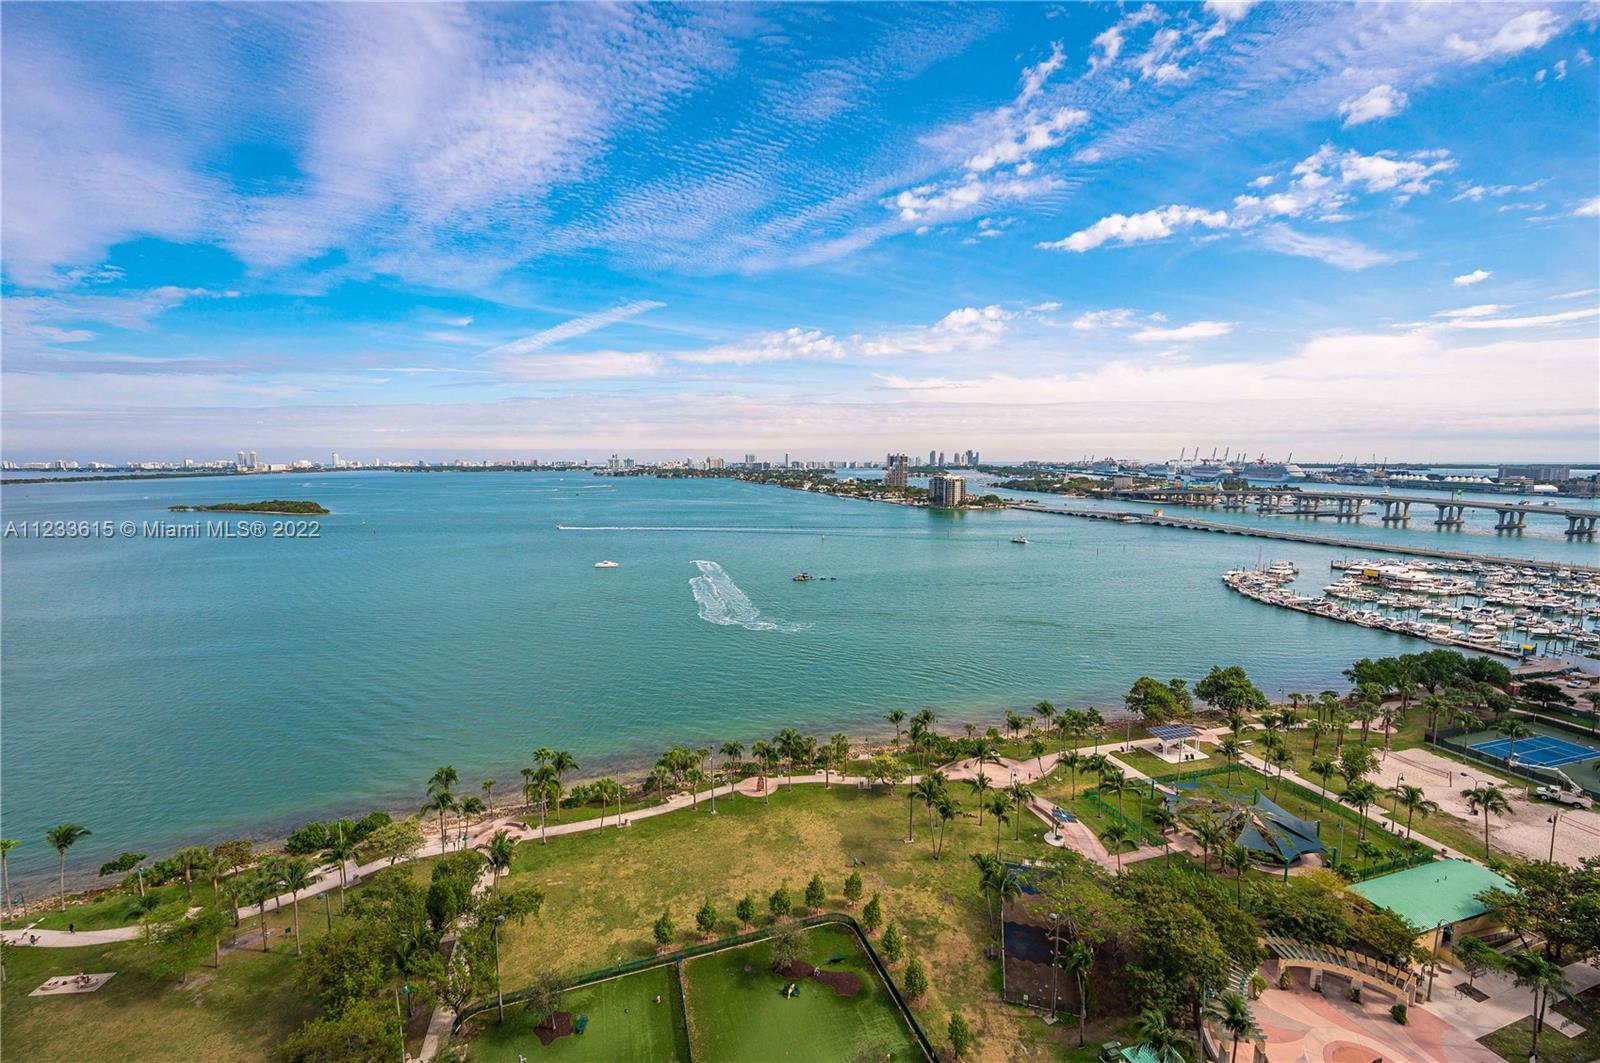 Most desirable and rarely available, 2 bed 2 bath with amazing unobstructed views of Biscayne Bay fr